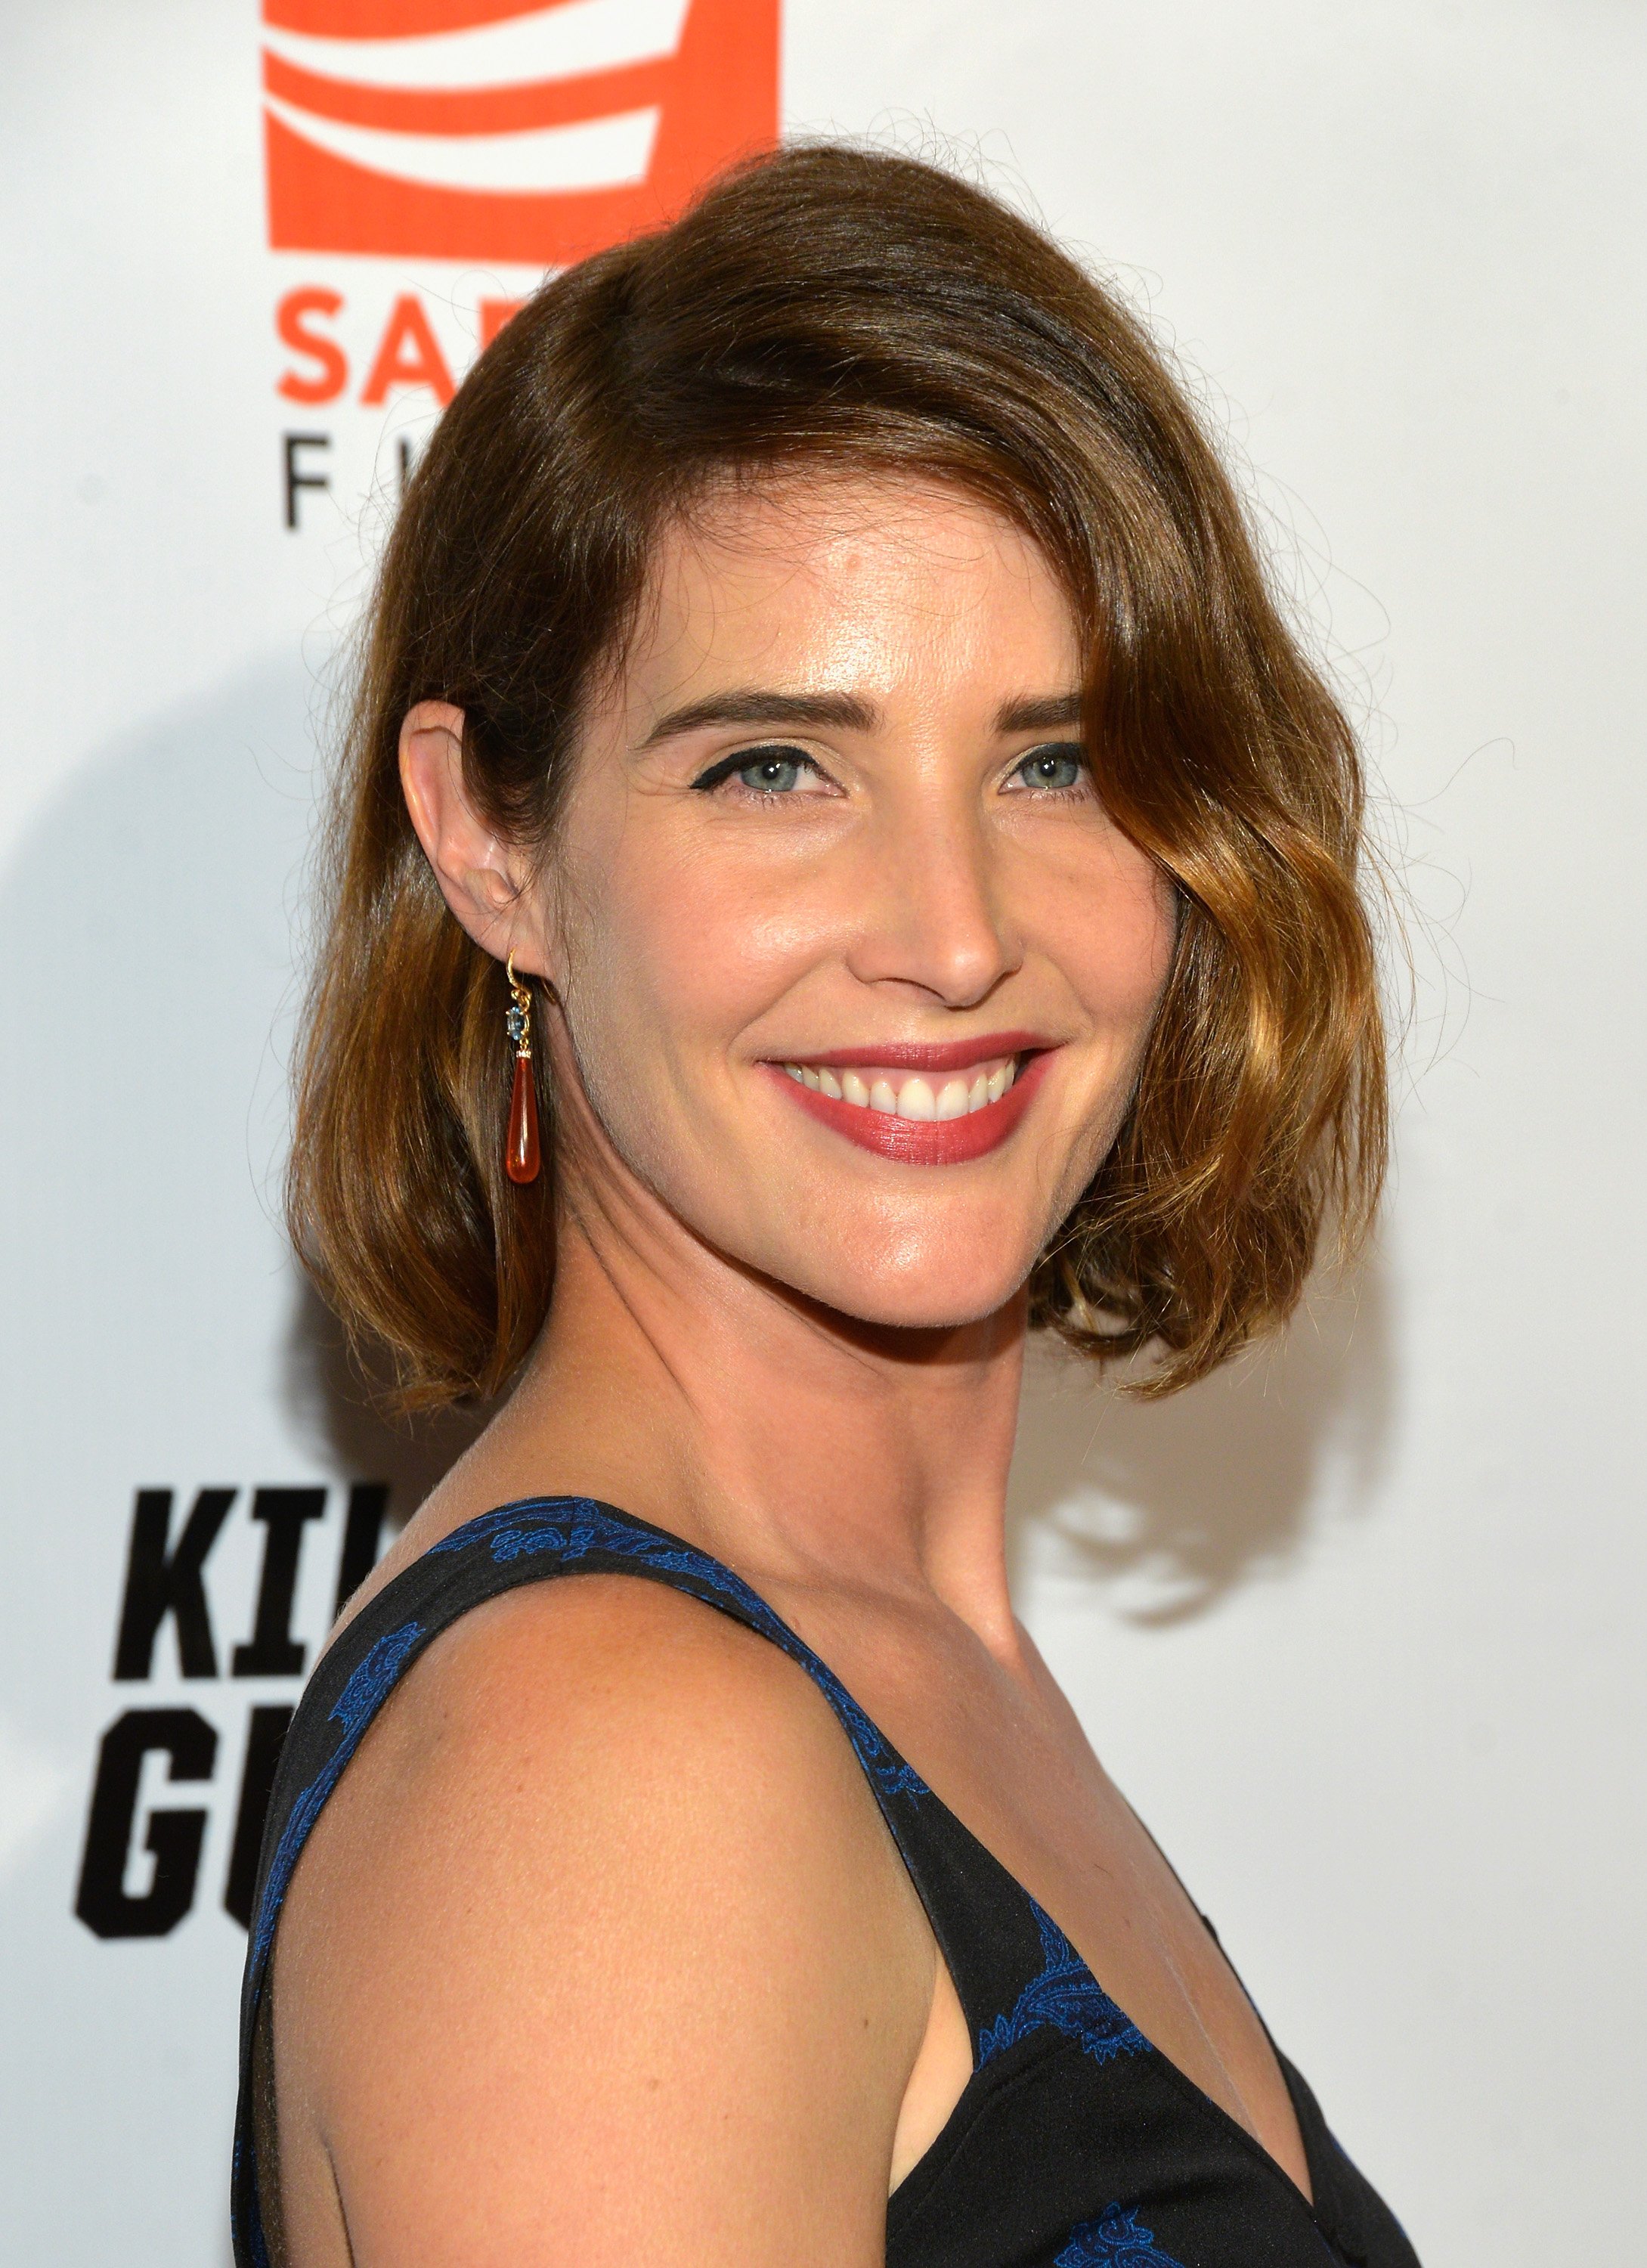 Cobie Smulders am TCL Chinese Theatre am 14. Oktober 2017 in Hollywood, Kalifornien. | Quelle: Getty Images